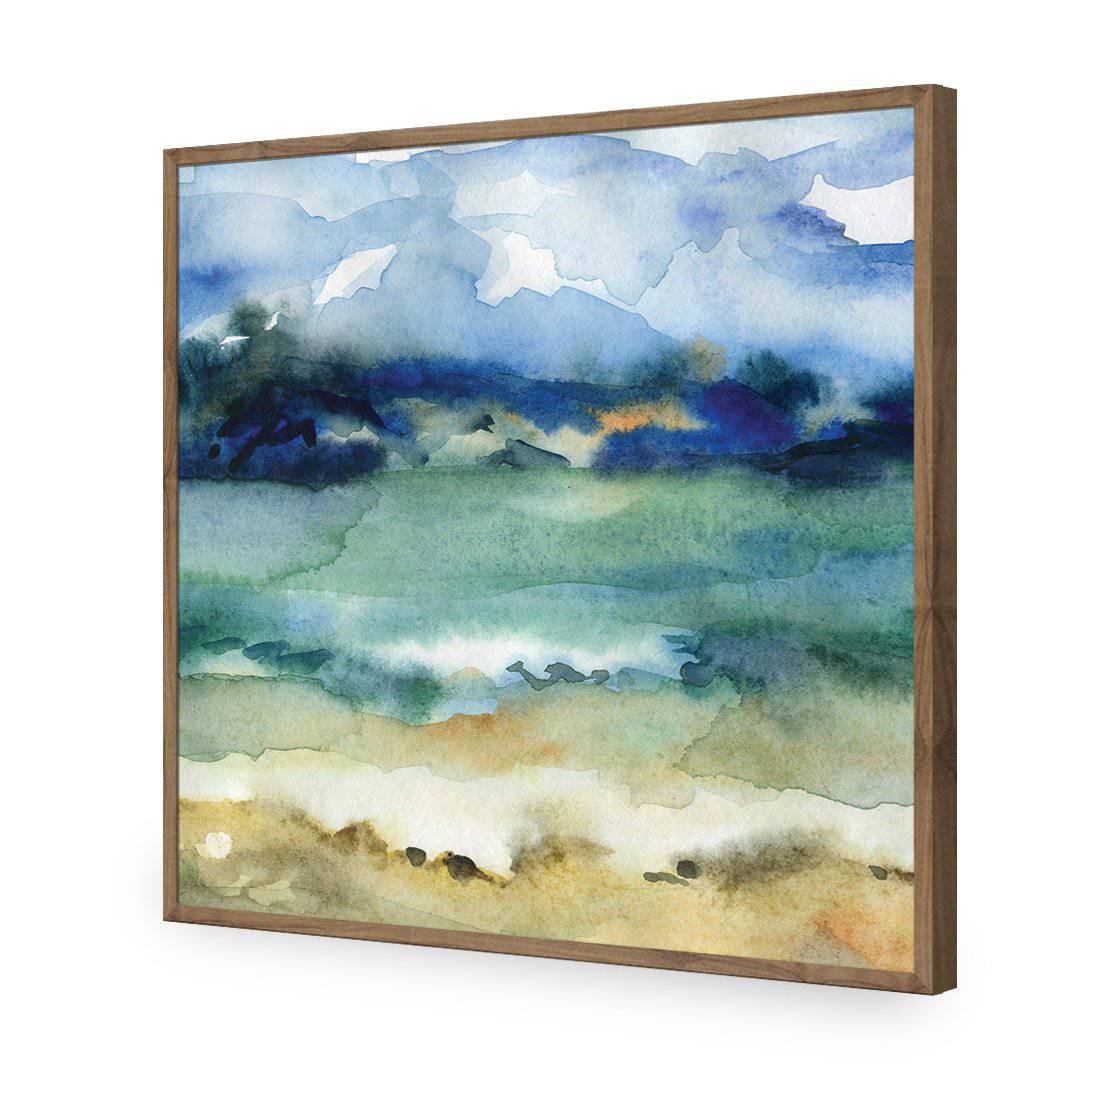 Timeless, Square-Acrylic-Wall Art Design-Without Border-Acrylic - Natural Frame-37x37cm-Wall Art Designs